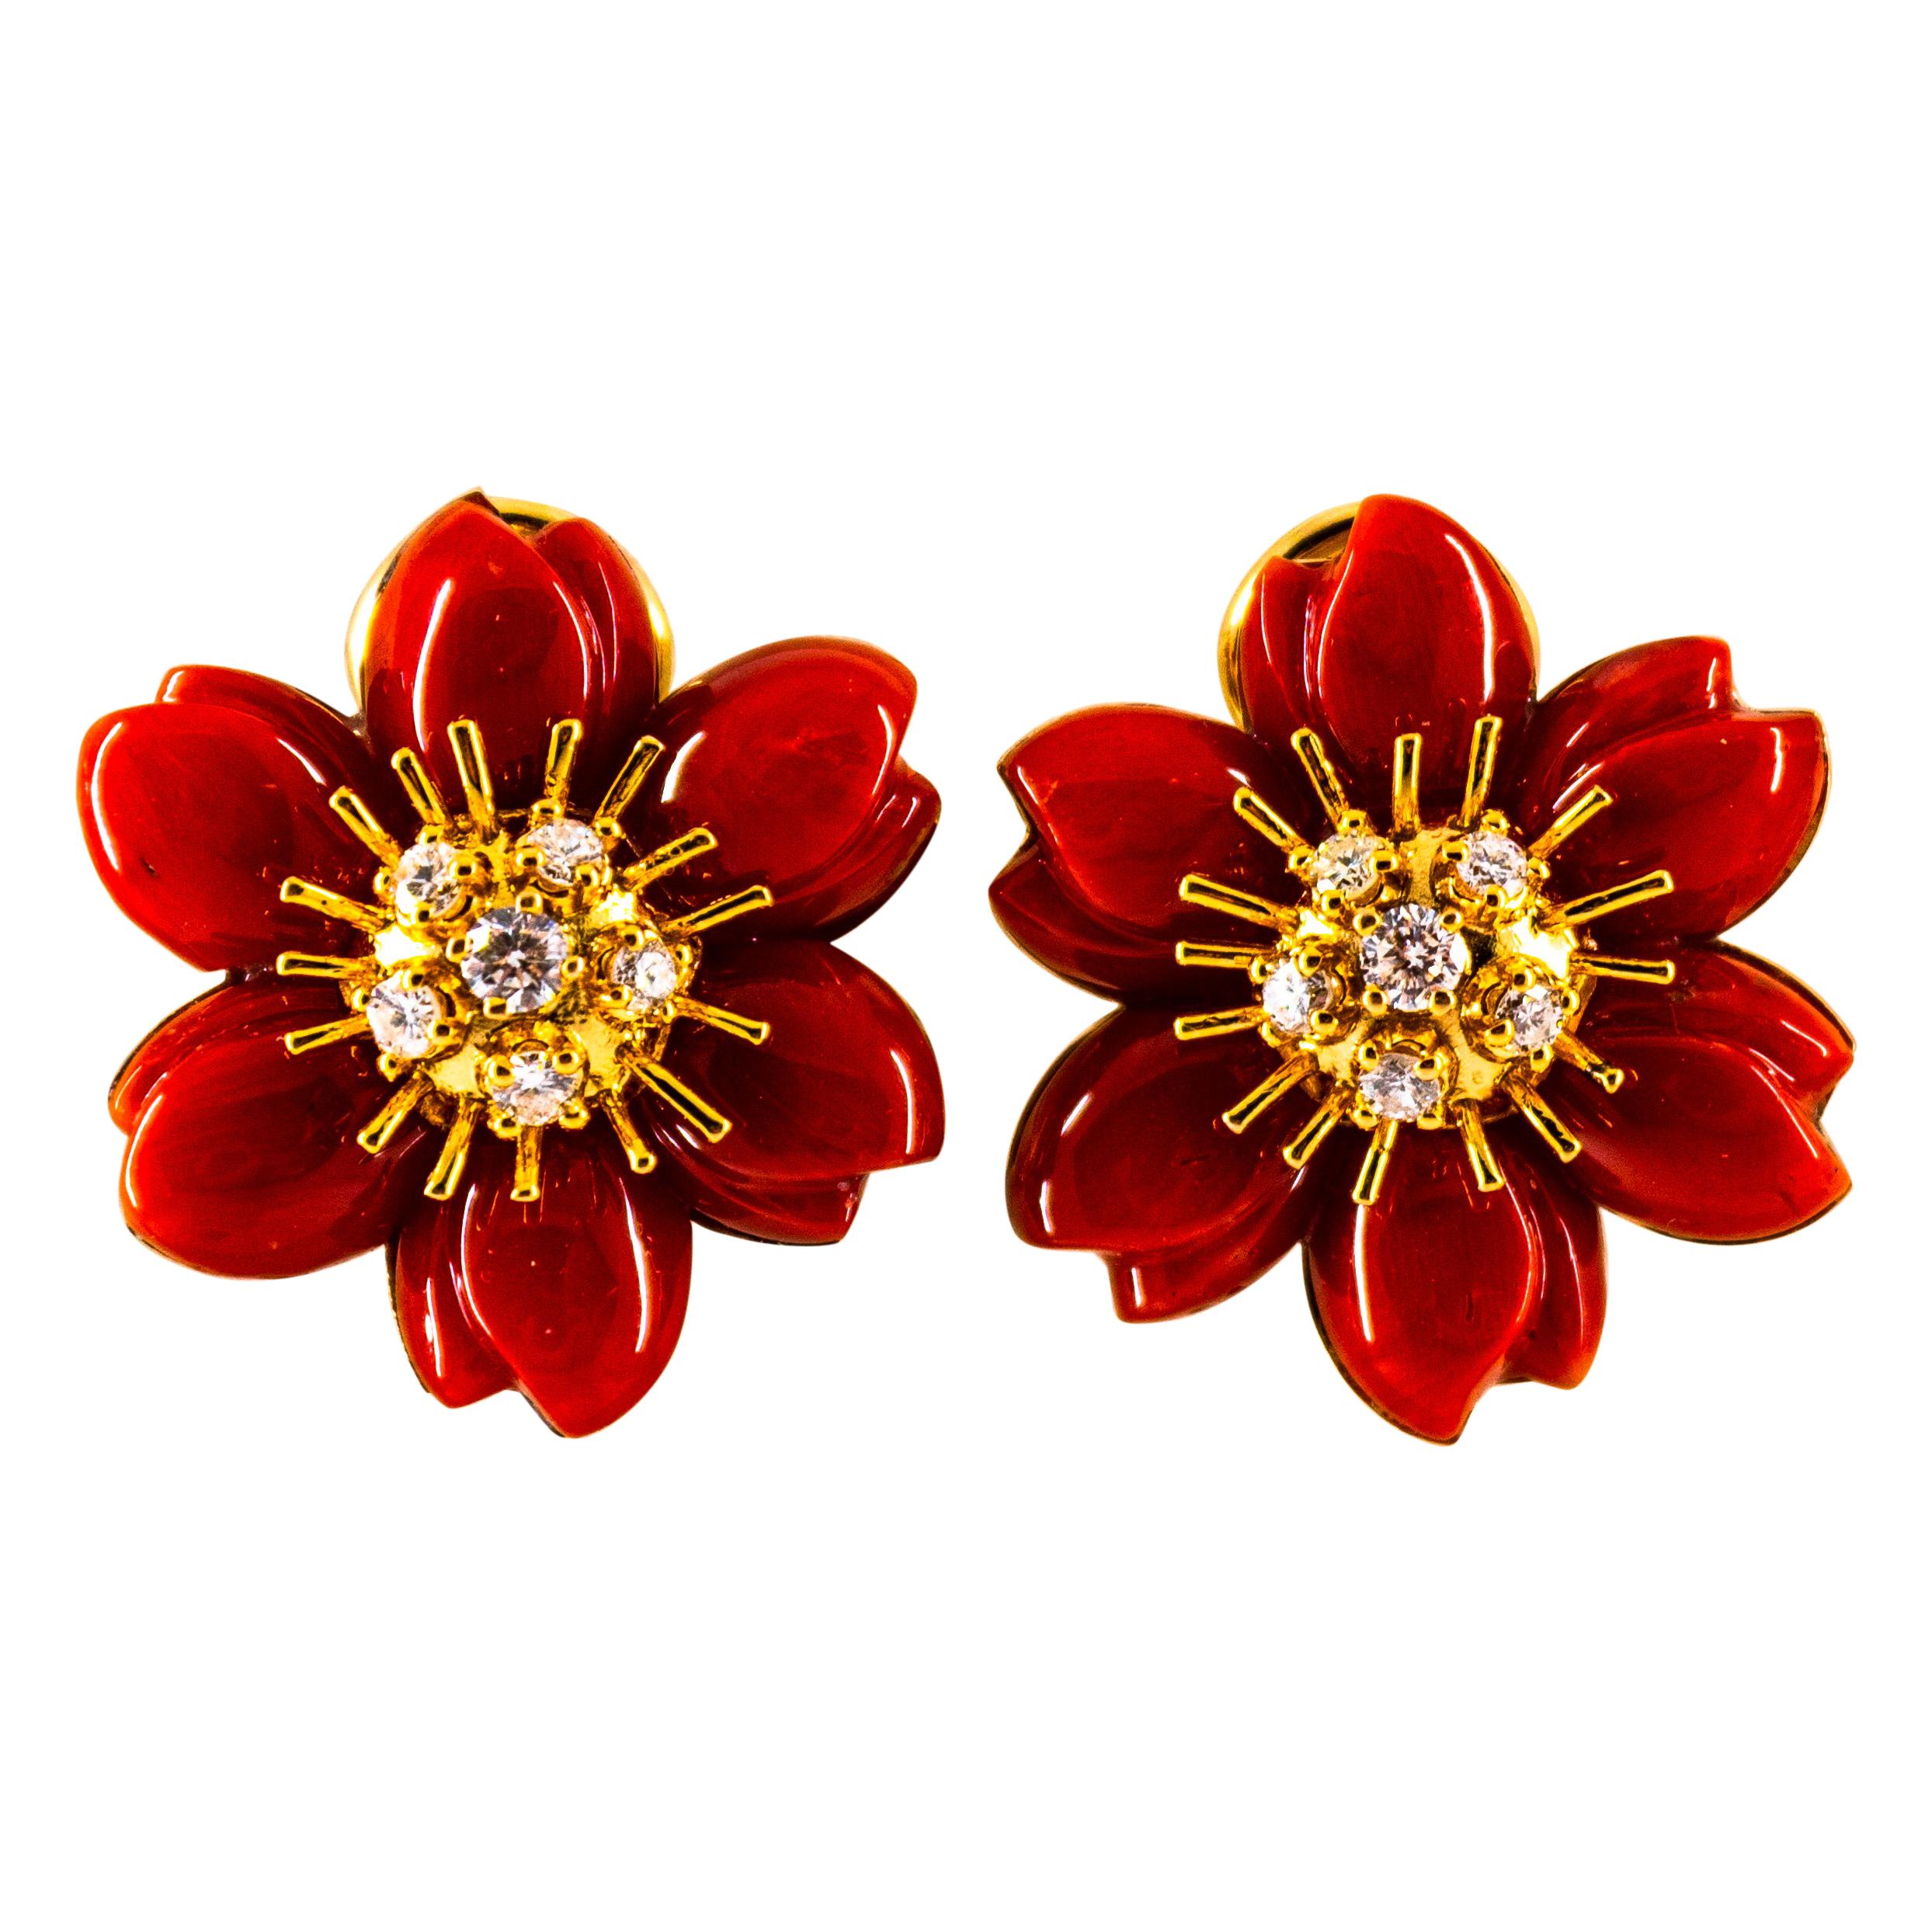 Mediterranean Red Coral 0.60 Carat White Diamond Yellow Gold "Flowers" Earrings